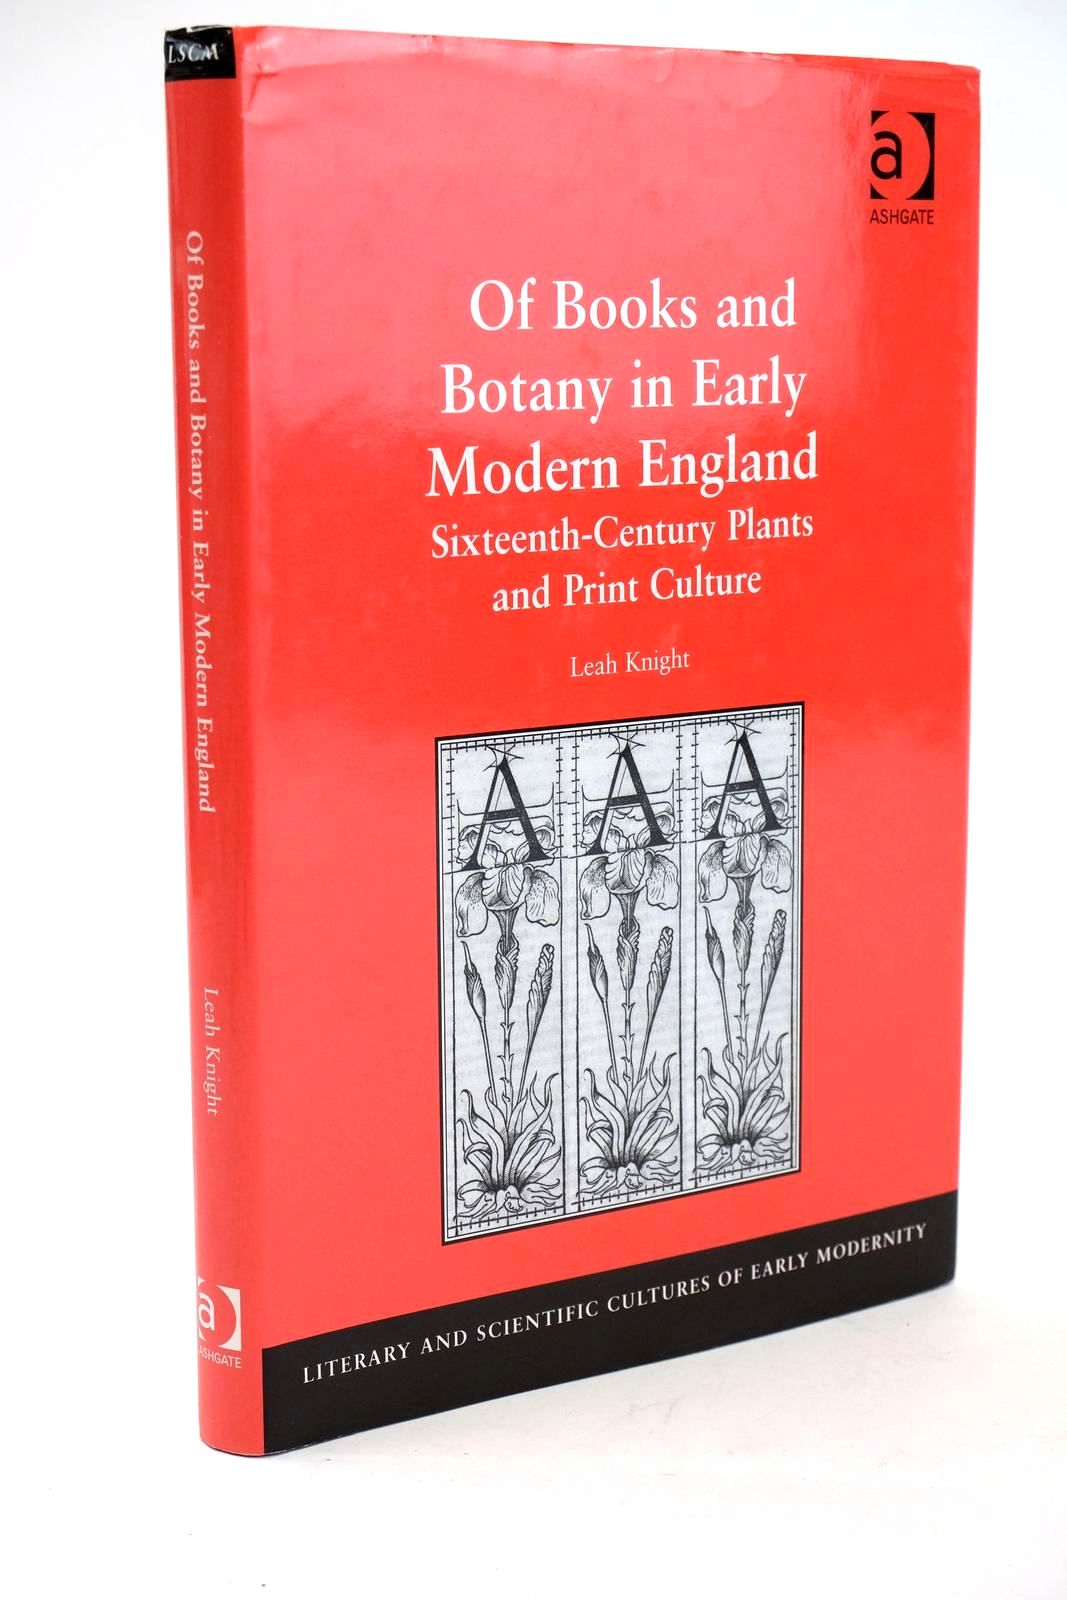 Photo of OF BOOKS AND BOTANY IN EARLY MODERN ENGLAND written by Knight, Leah published by Ashgate Publishing Company (STOCK CODE: 1324121)  for sale by Stella & Rose's Books